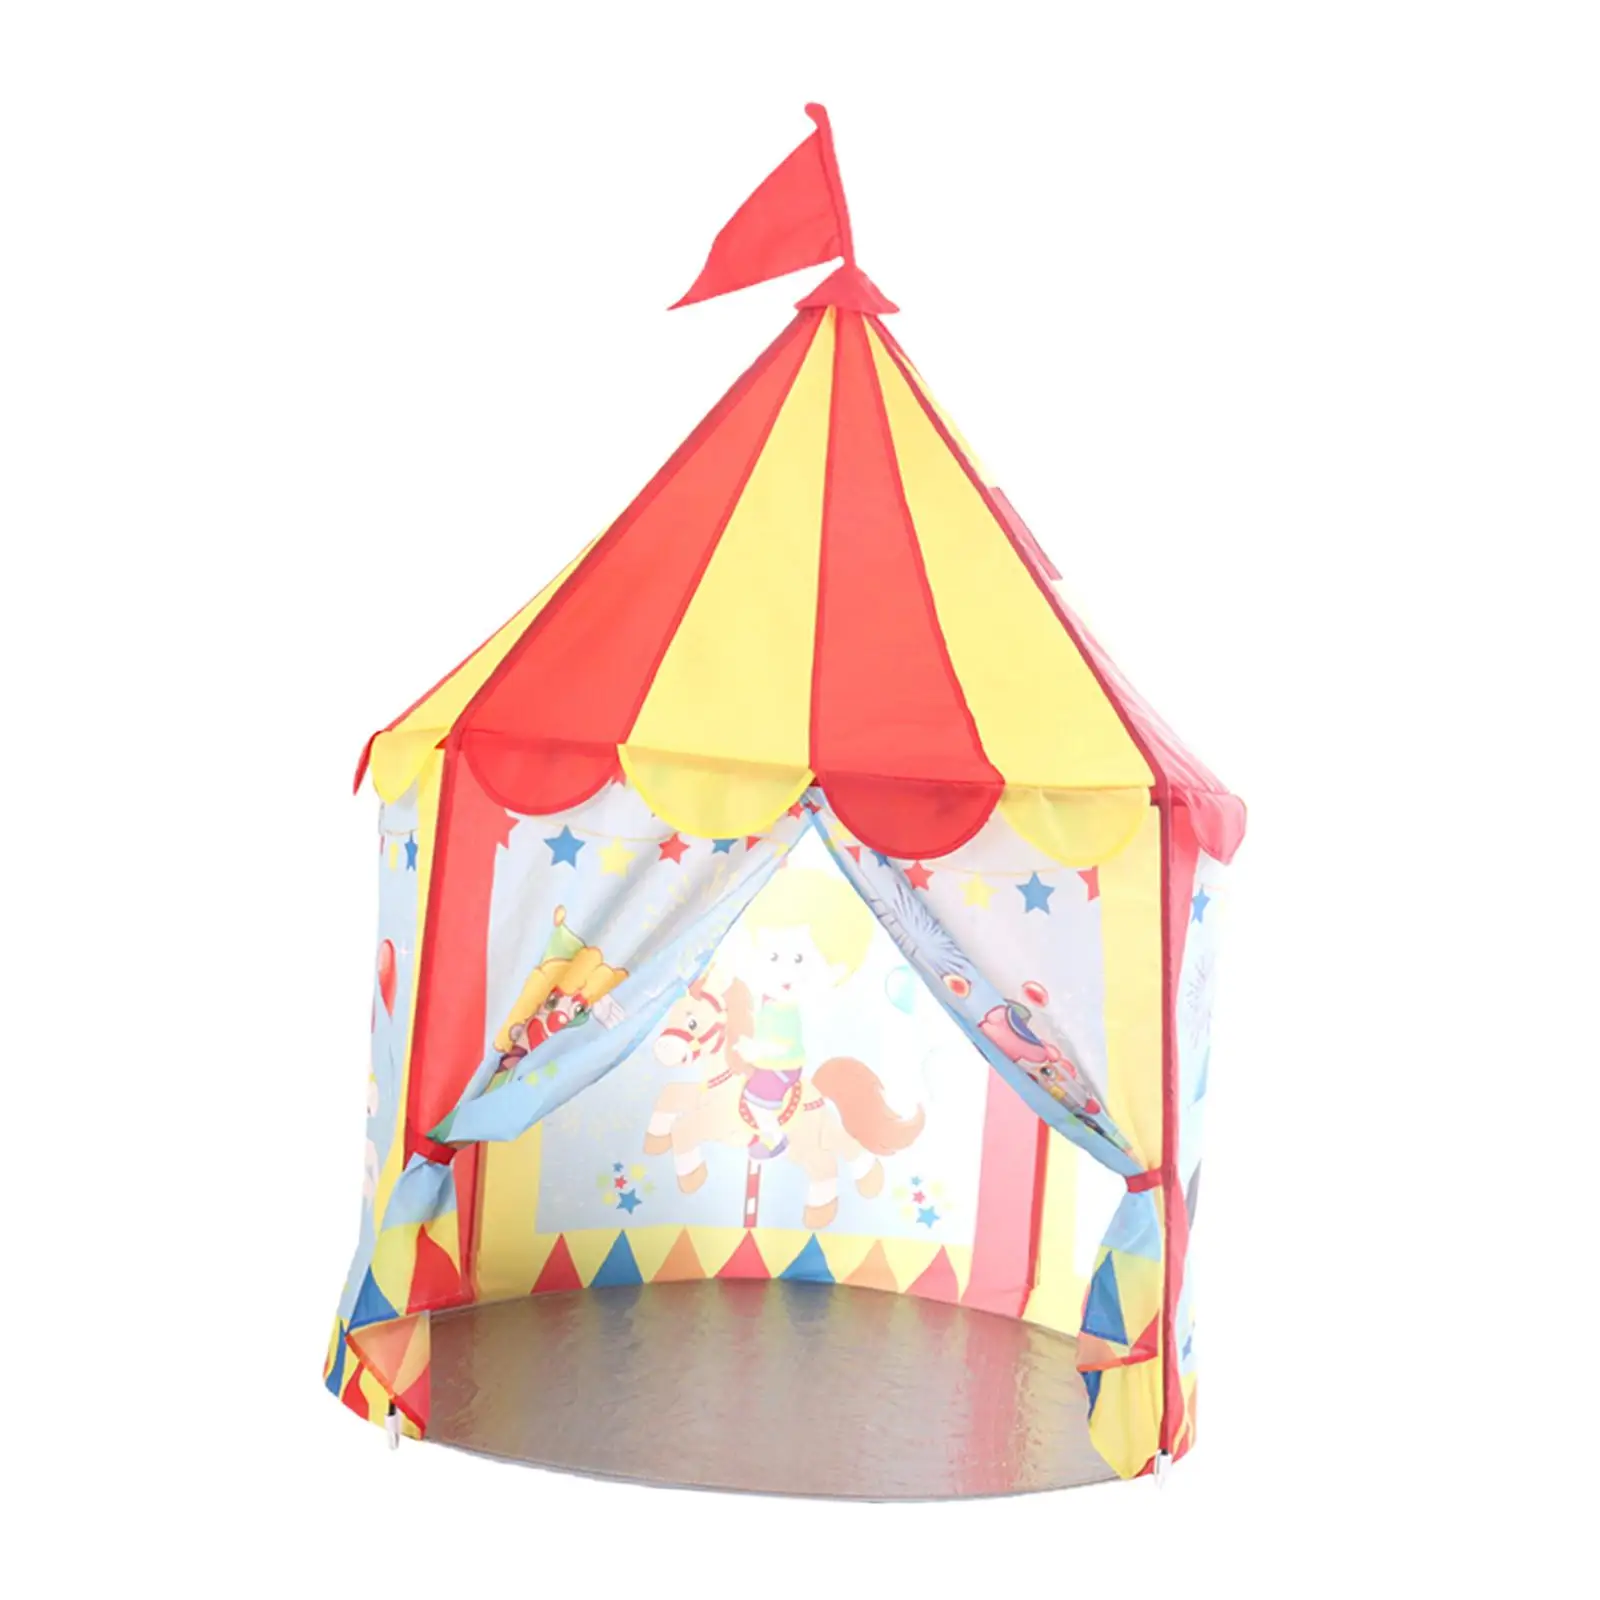 Play Tent House for Kids Portable Indoor Outdoor Tent Best Gift Kids Playhouse Play Teepee for Games Camping Yard Kids